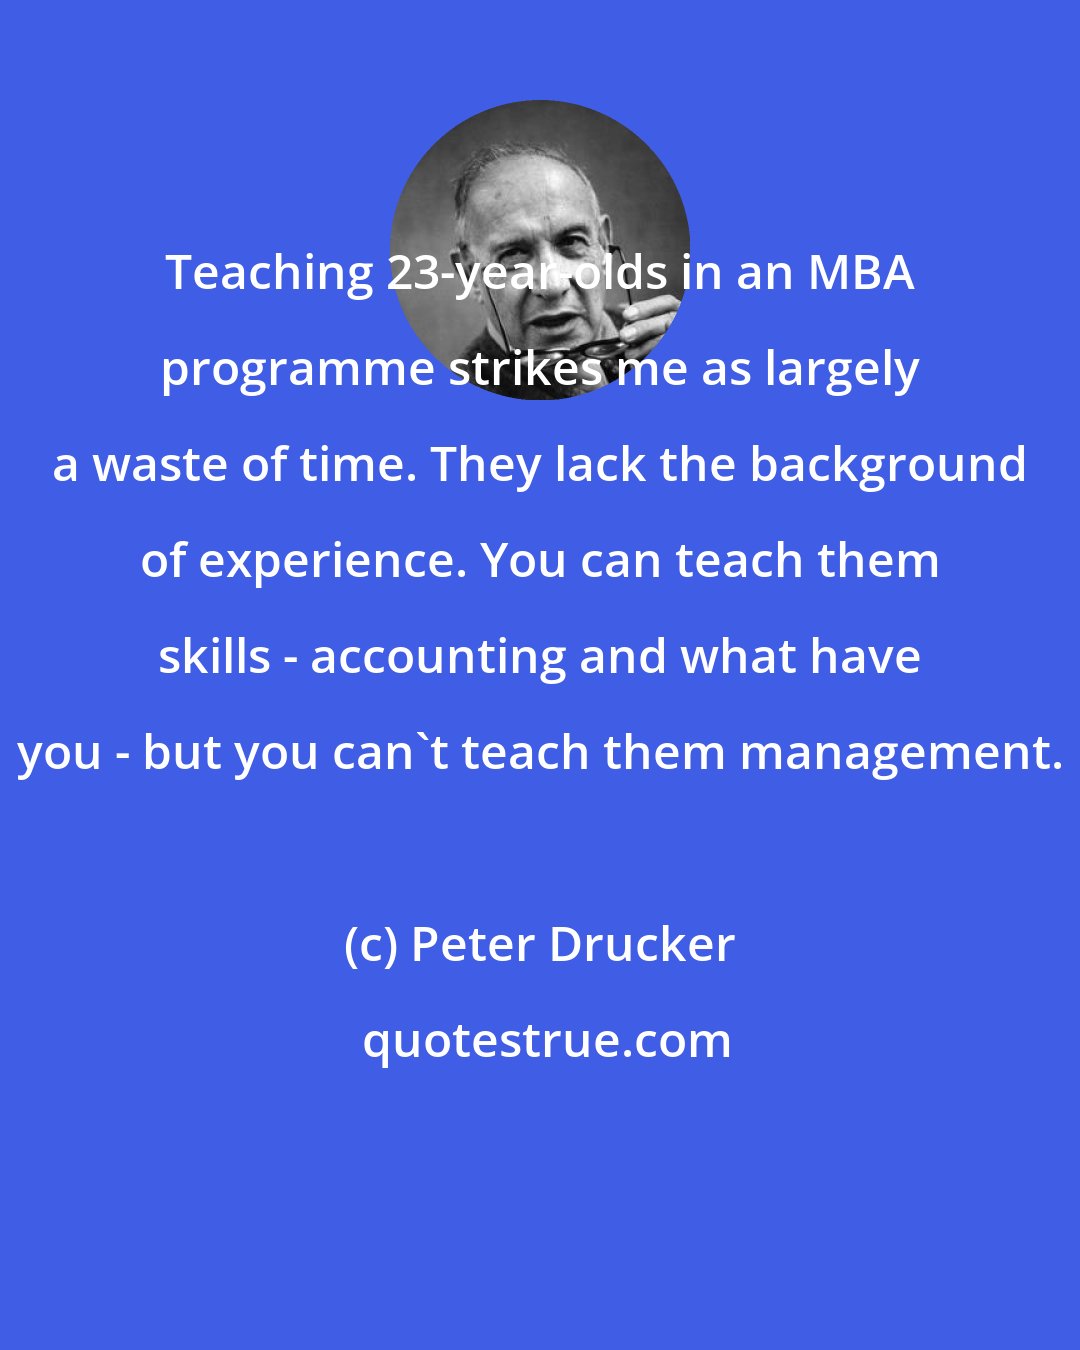 Peter Drucker: Teaching 23-year-olds in an MBA programme strikes me as largely a waste of time. They lack the background of experience. You can teach them skills - accounting and what have you - but you can't teach them management.